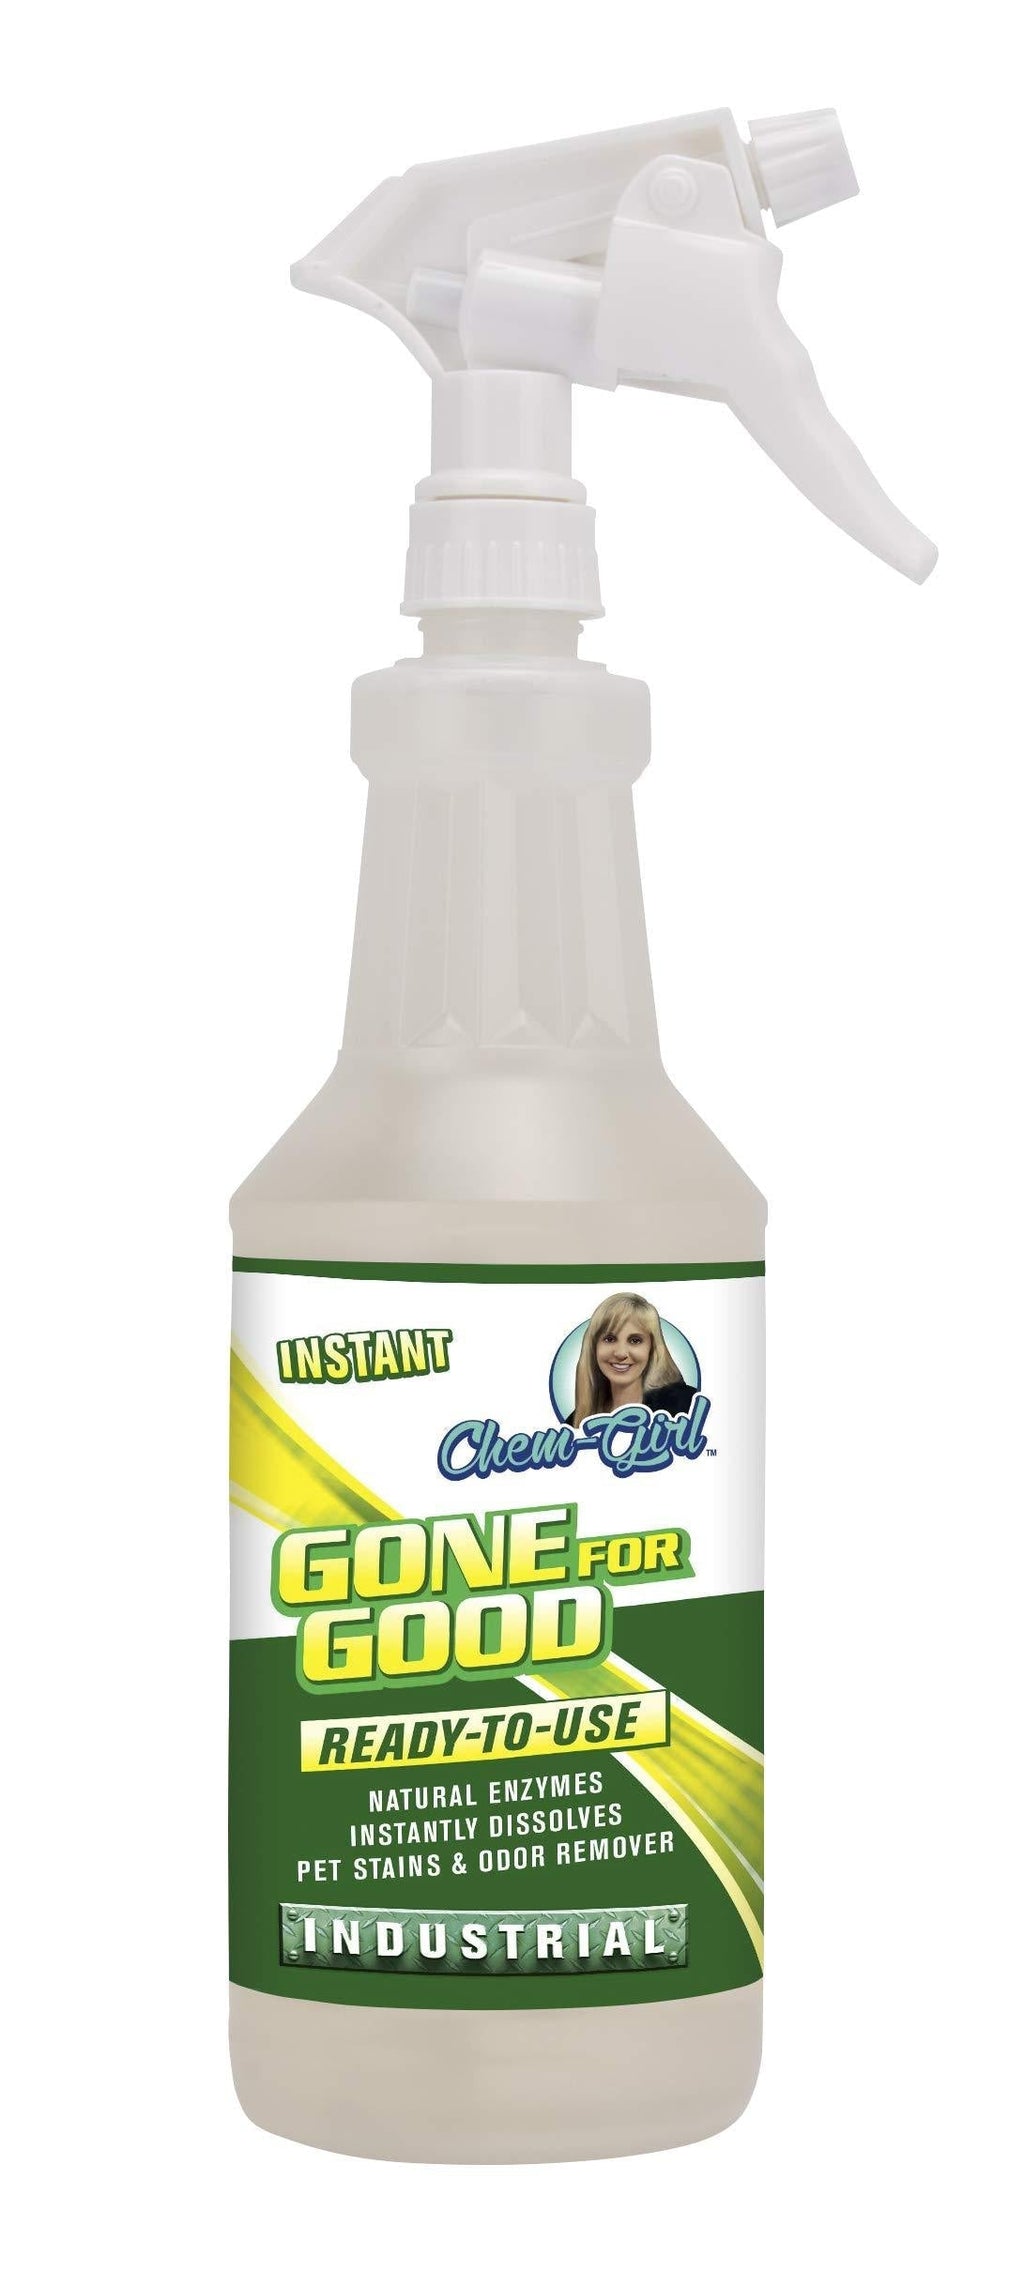 [Australia] - Chem-Girl | Gone for Good Professional Enzymatic Stain & Odor Remover - Remove Pet Urine + Prevent Repeat Habits | Concentrated, All Natural, Pet Safe, Indoor/Outdoor, for Hard & Soft Surfaces Quart 